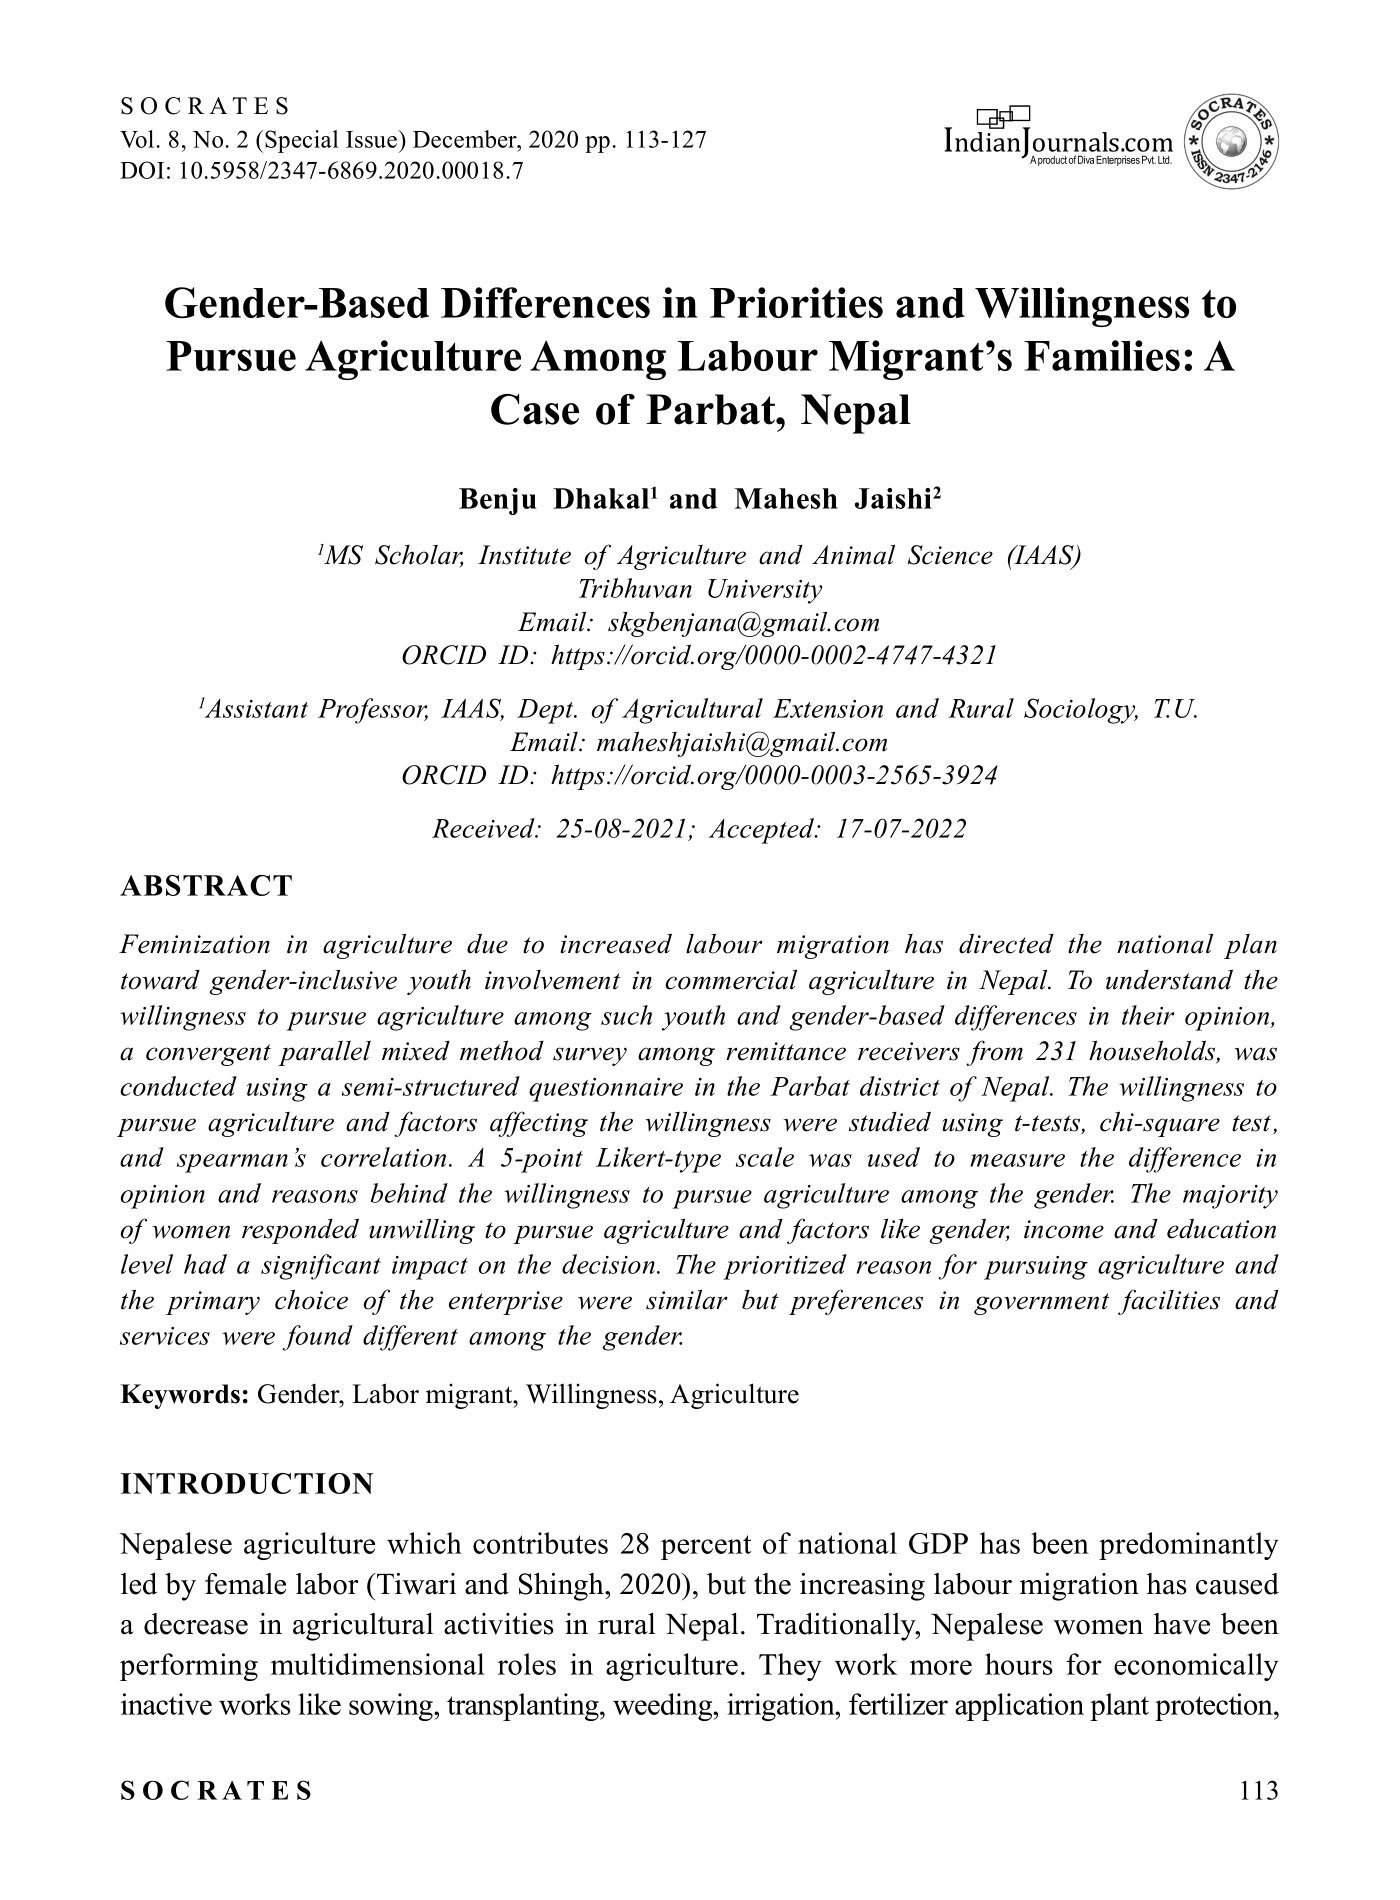  Settings Gender based differences in priorities and willingness to pursue agriculture among labor migrants’ families